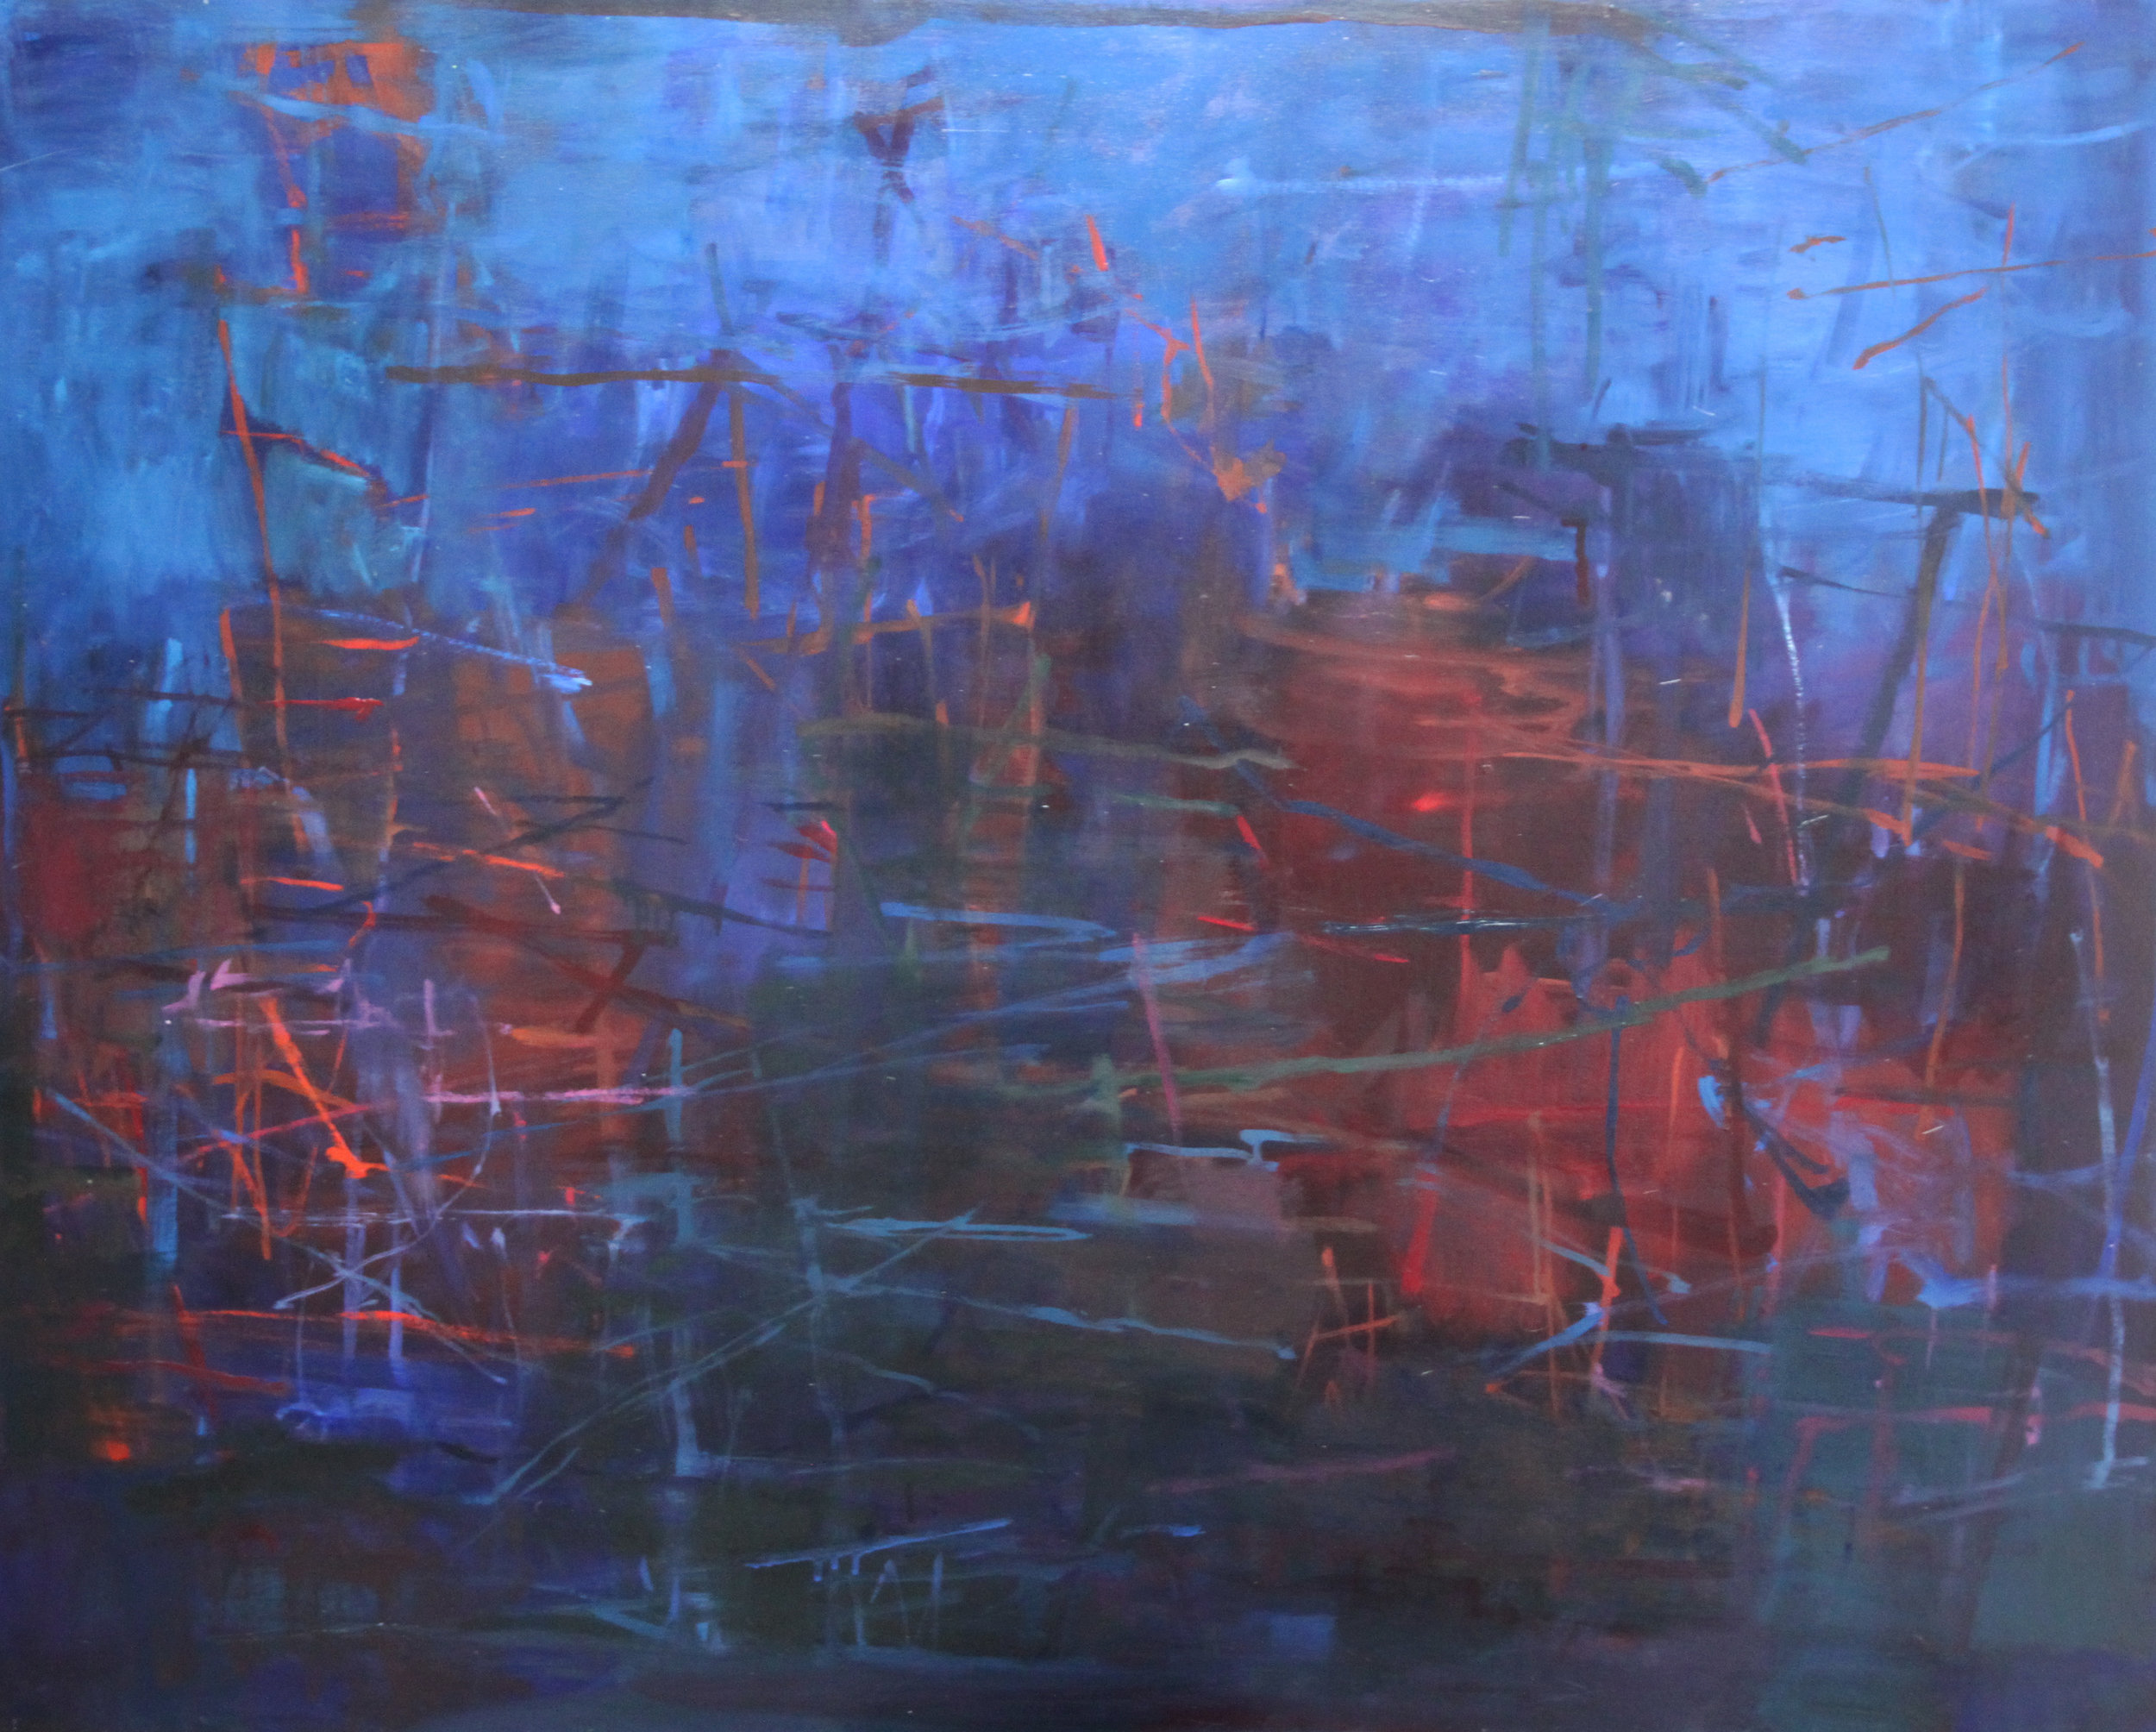 Sandra Russell, In the Dark Places, 2015, Oil on Canvas, 48x60, $6500.jpg